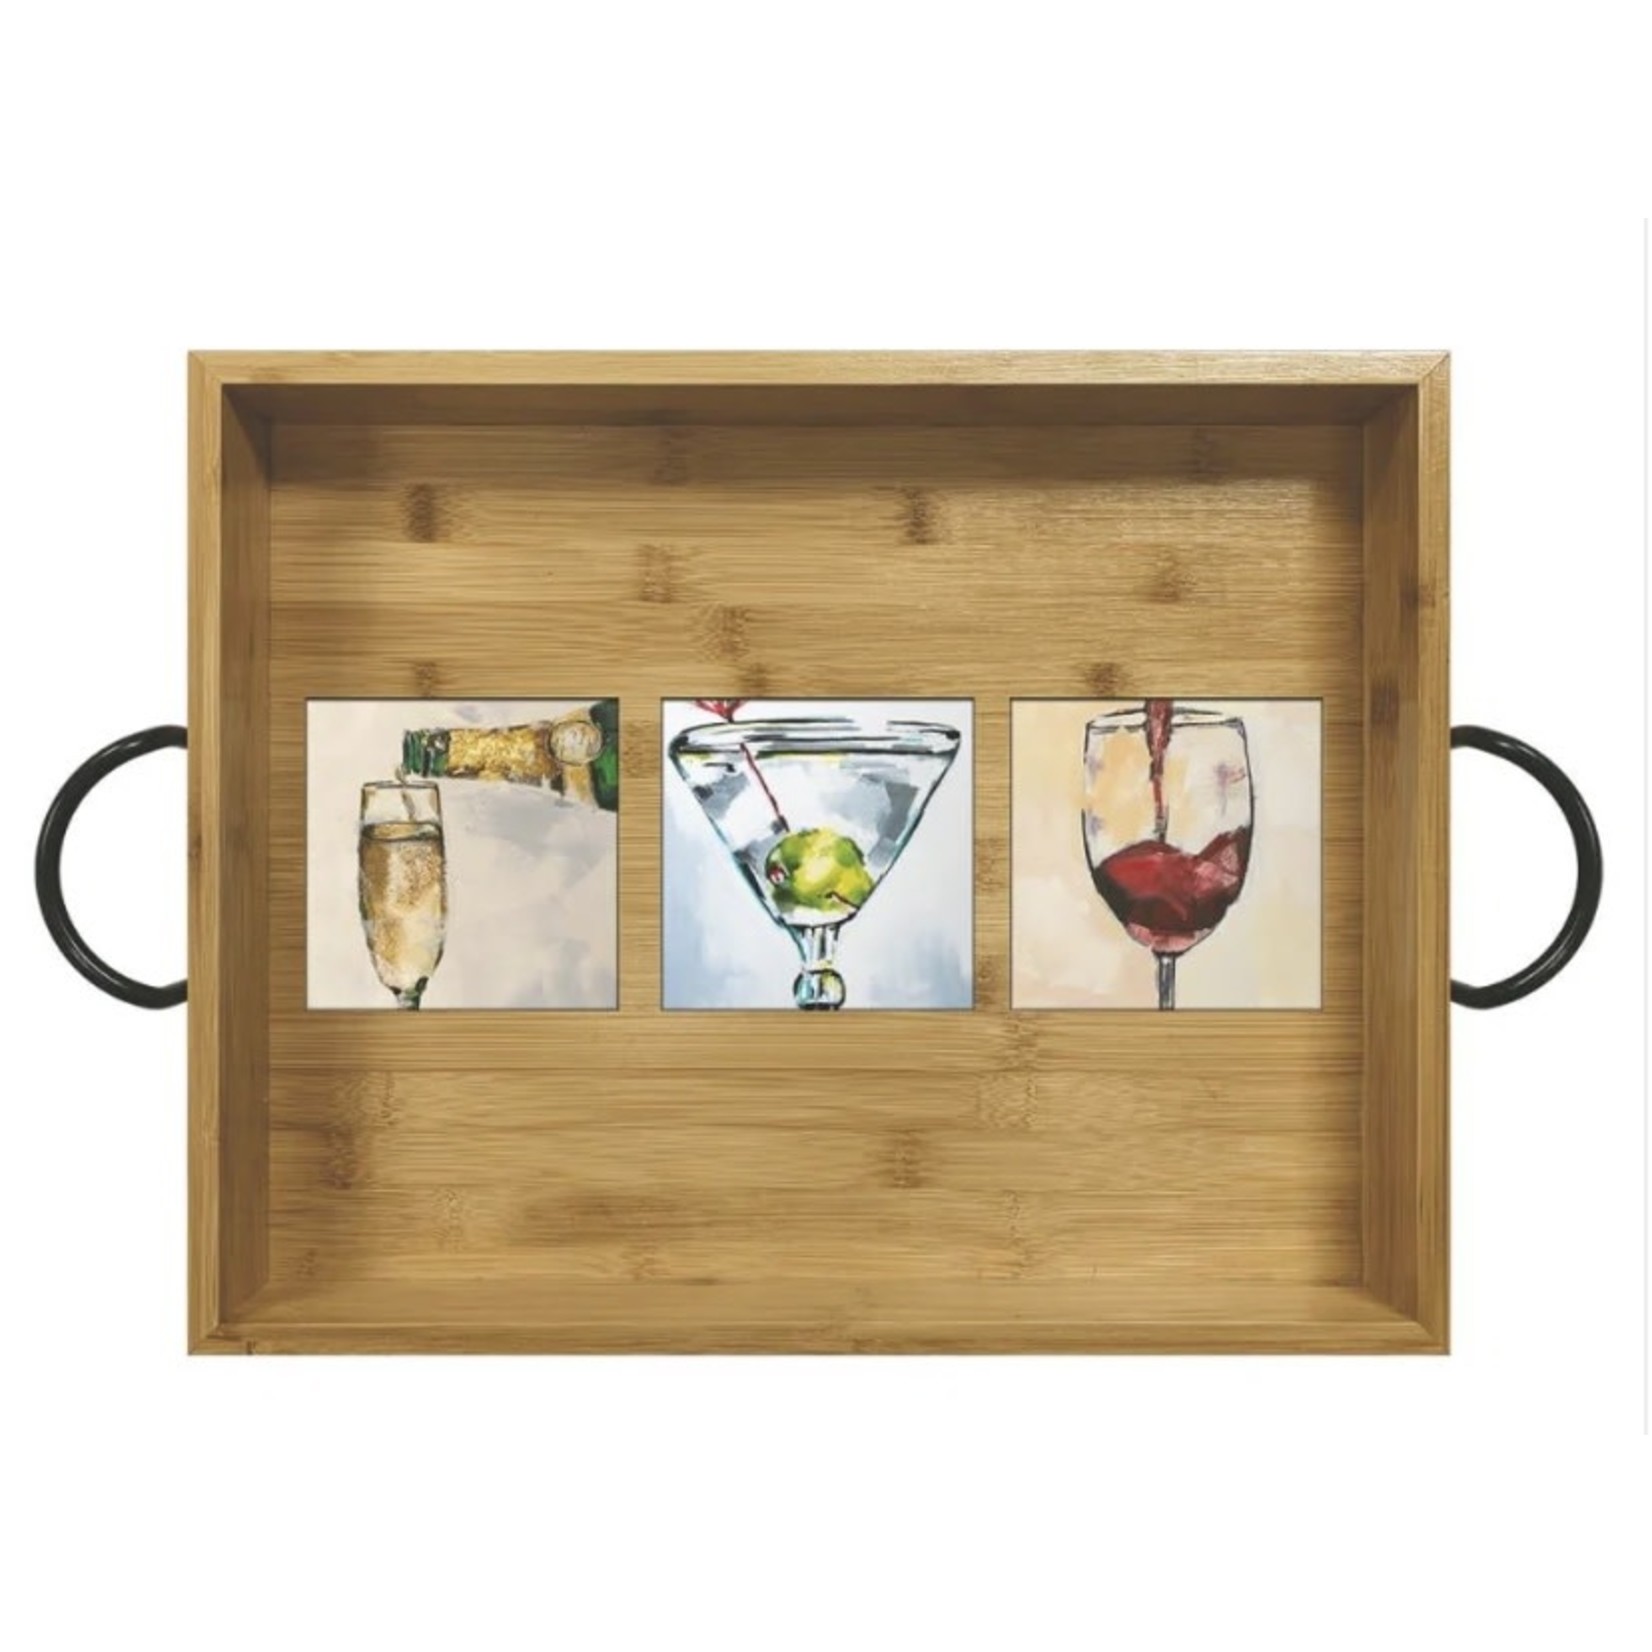 PAPER PRODUCTS DESIGN PPD Bamboo Serving Tray- Art of Alcohol